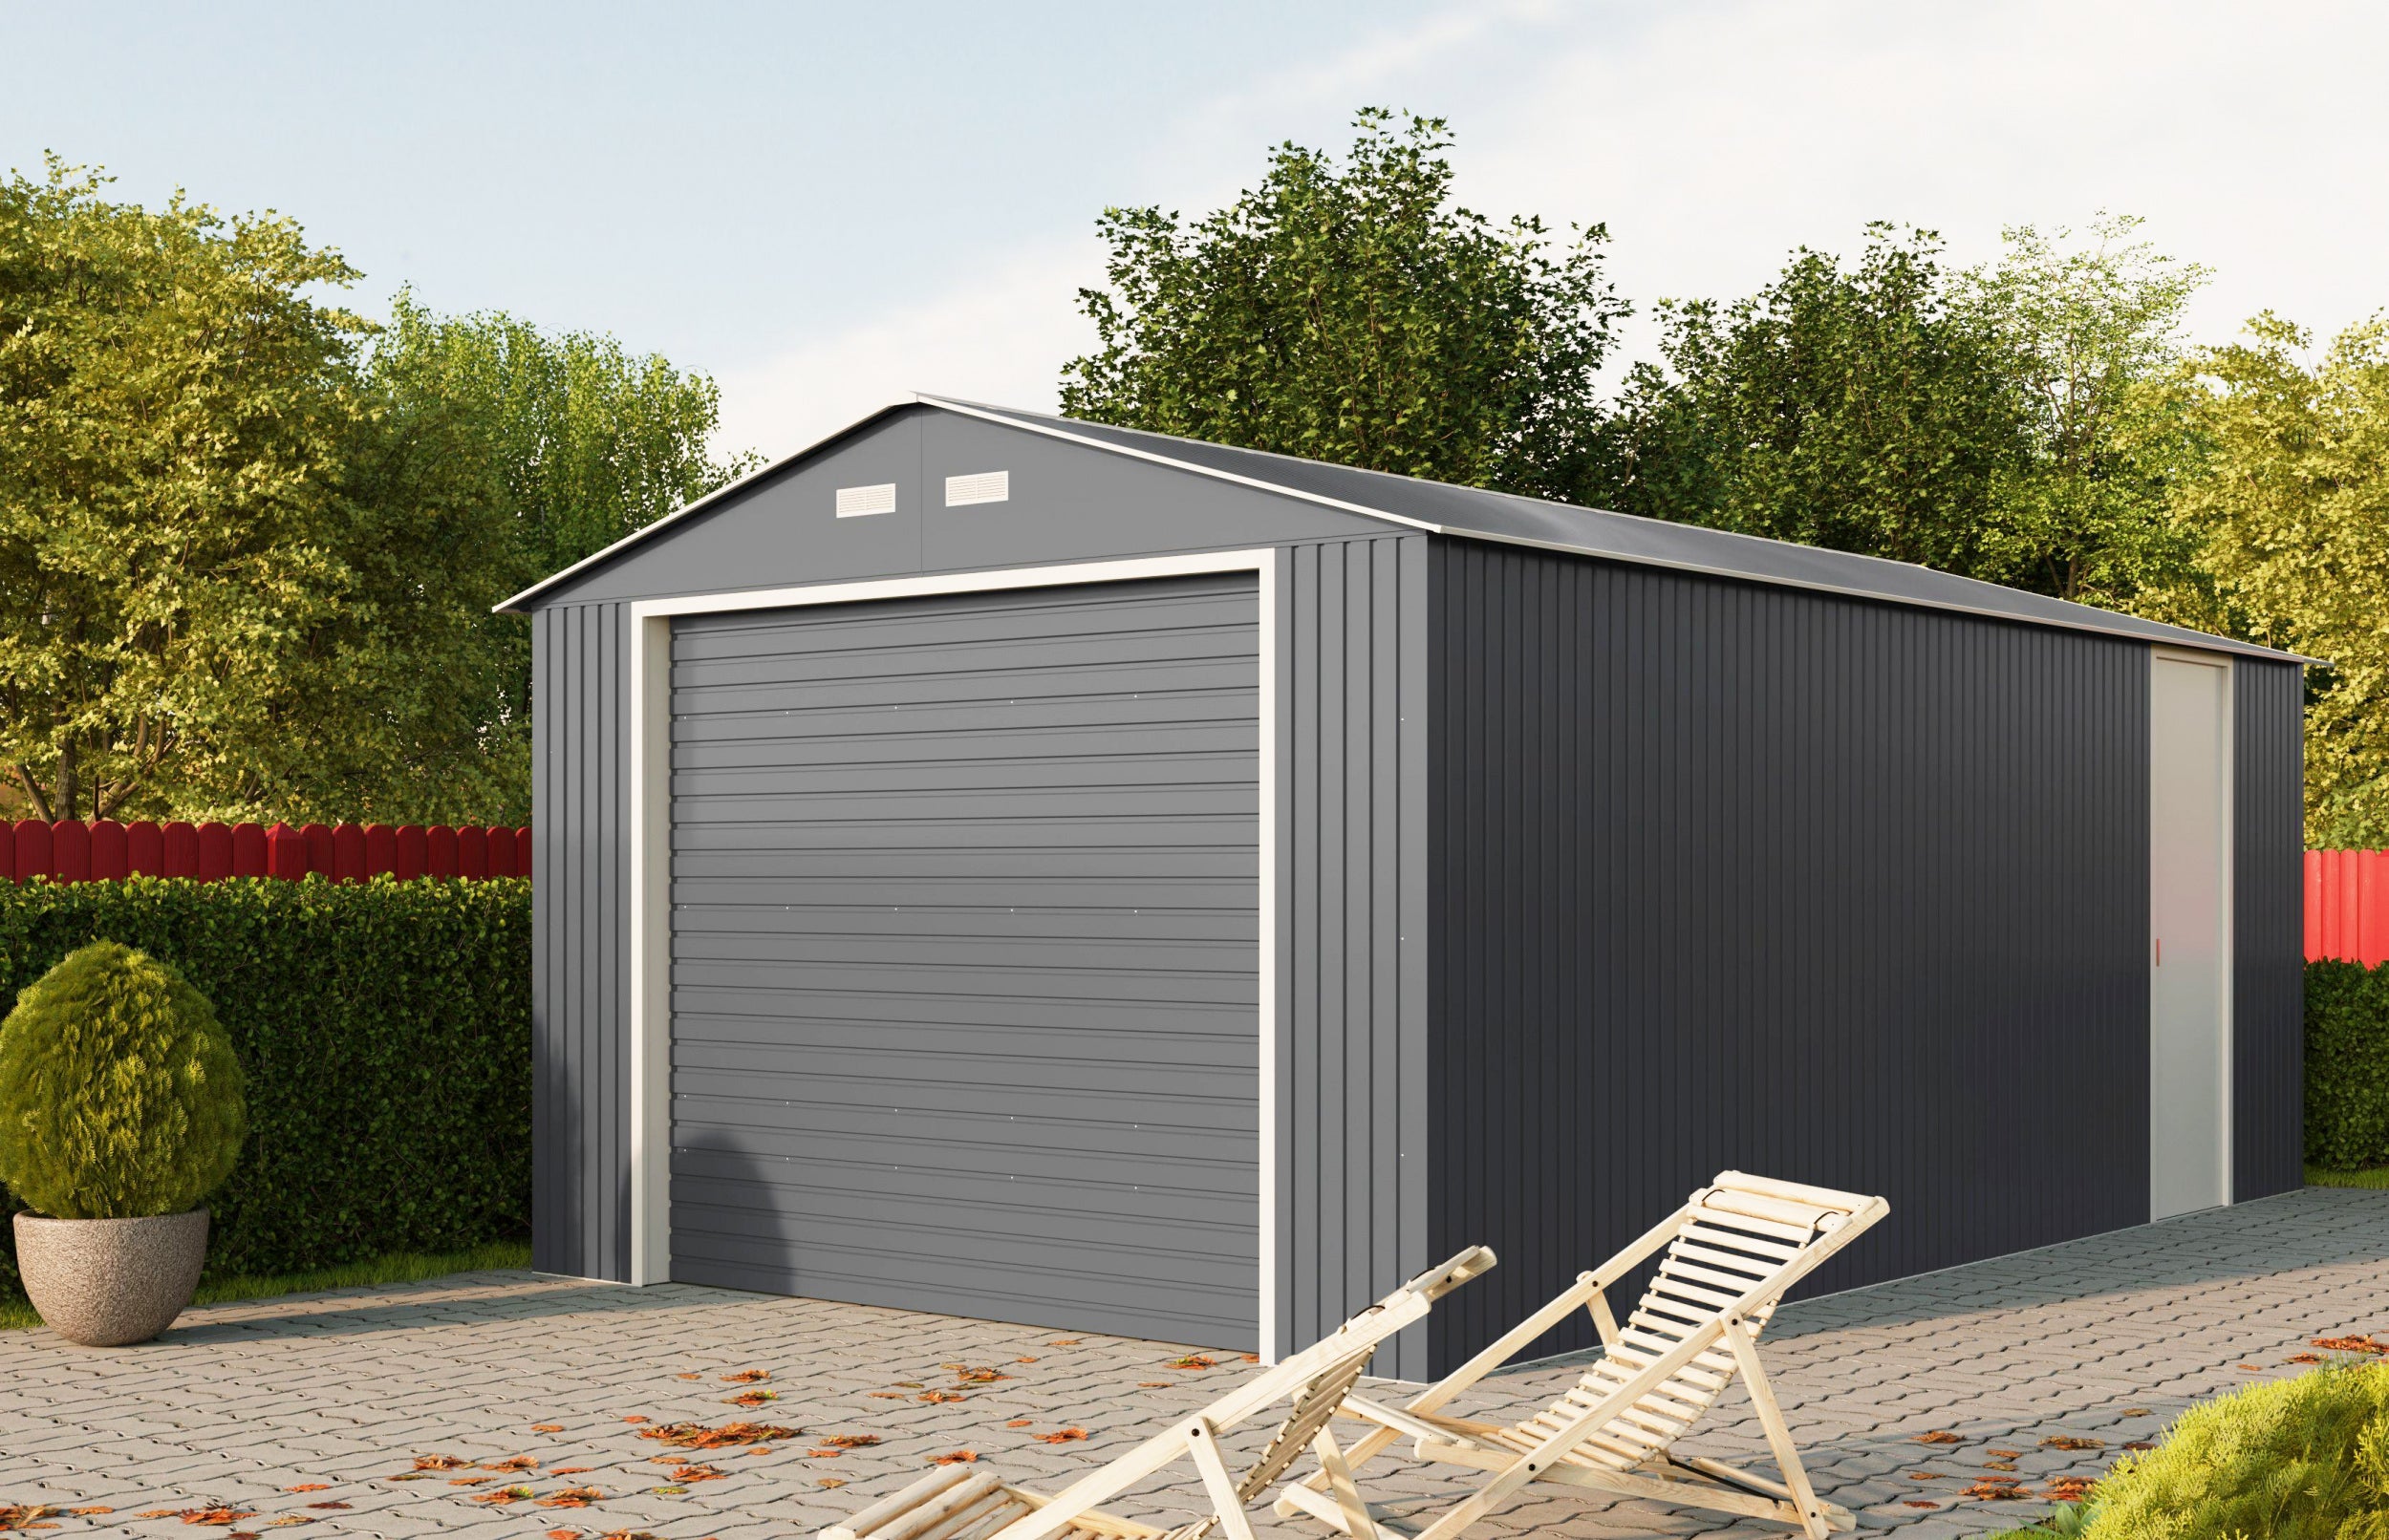 duramax imperial metal garage in dark gray with roll up door and side entry swing door on a patterned concrete floor